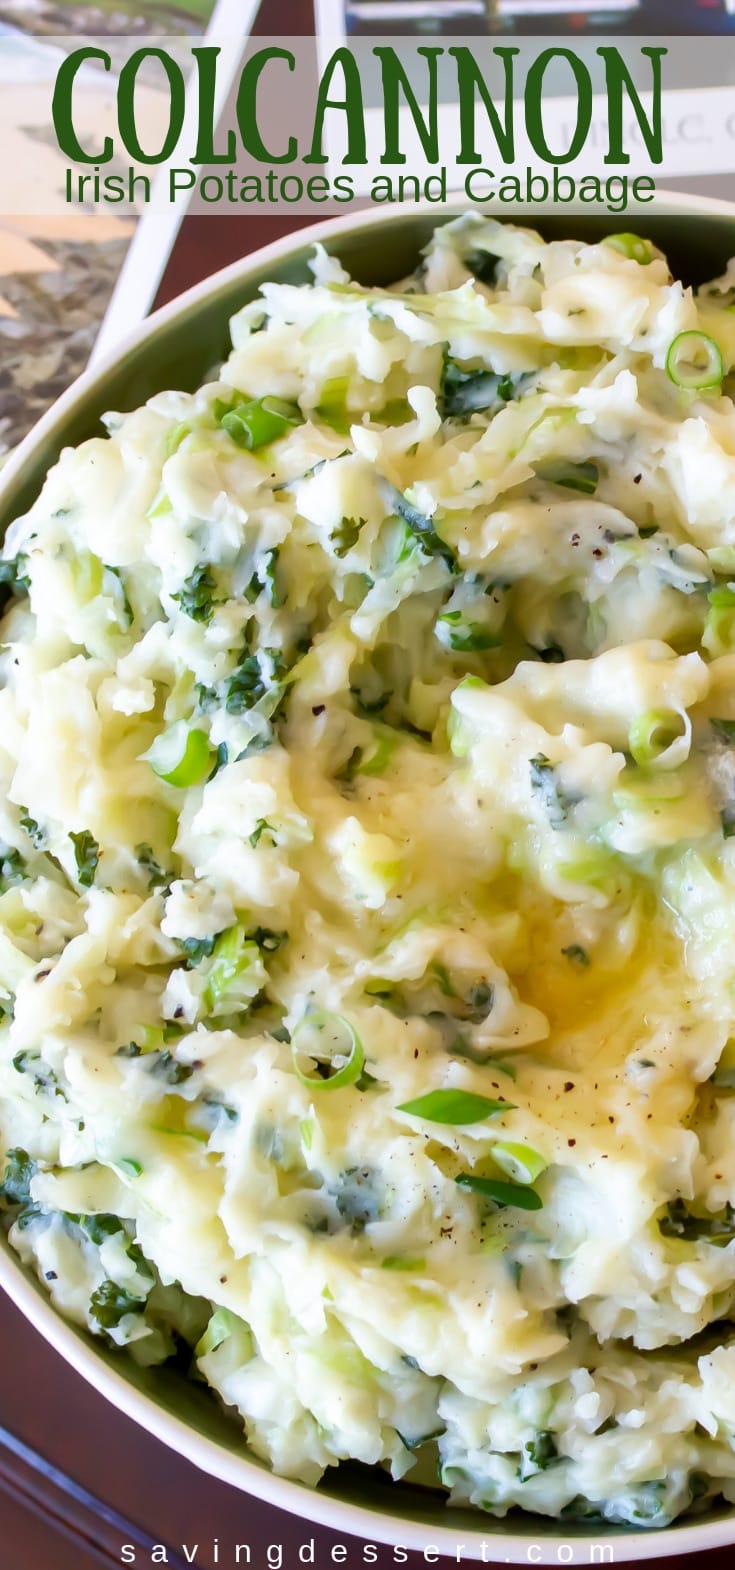 Colcannon ~ a traditional Irish dish made with cabbage, onions and potatoes.  Colcannon is easy to make, inexpensive, delicious pure Irish comfort food! #colcannon #irish #cabbage #potatoes #easymeal